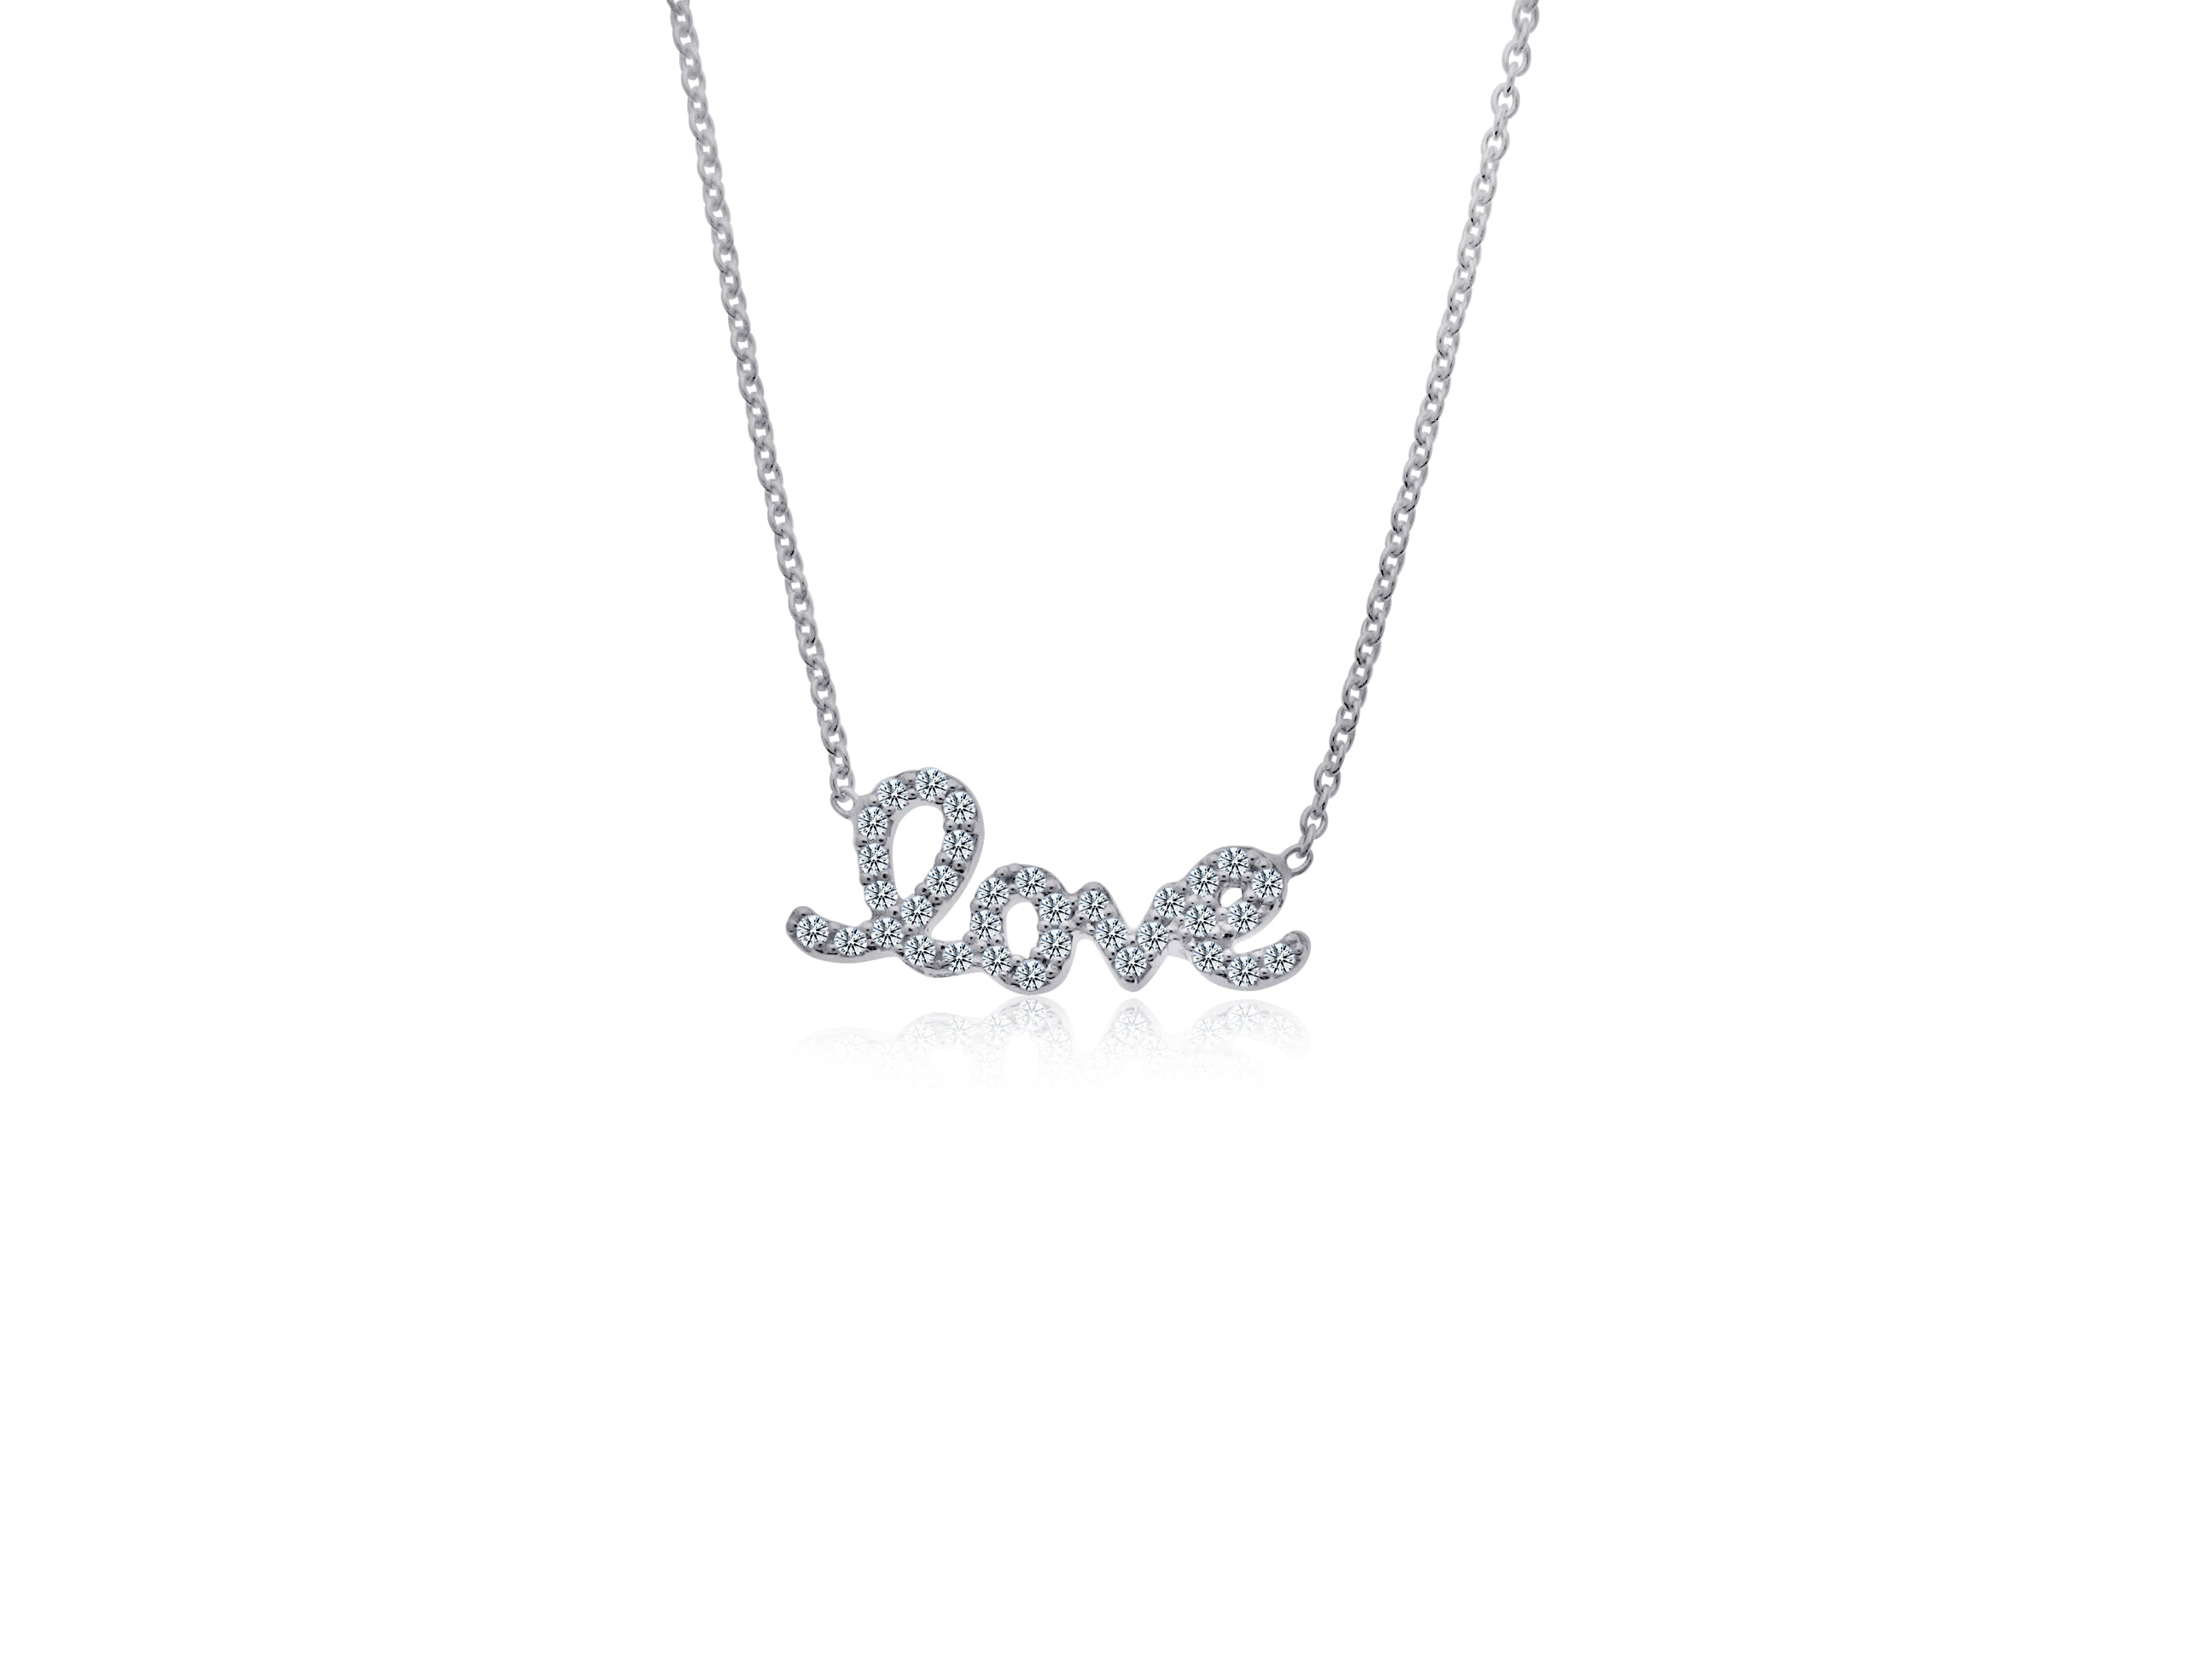 ROBERTO COIN 18K WHITE GOLD 0.12CT DIAMOND LOVE NECKLACE FROM THE TINY TREASURES COLLECTION